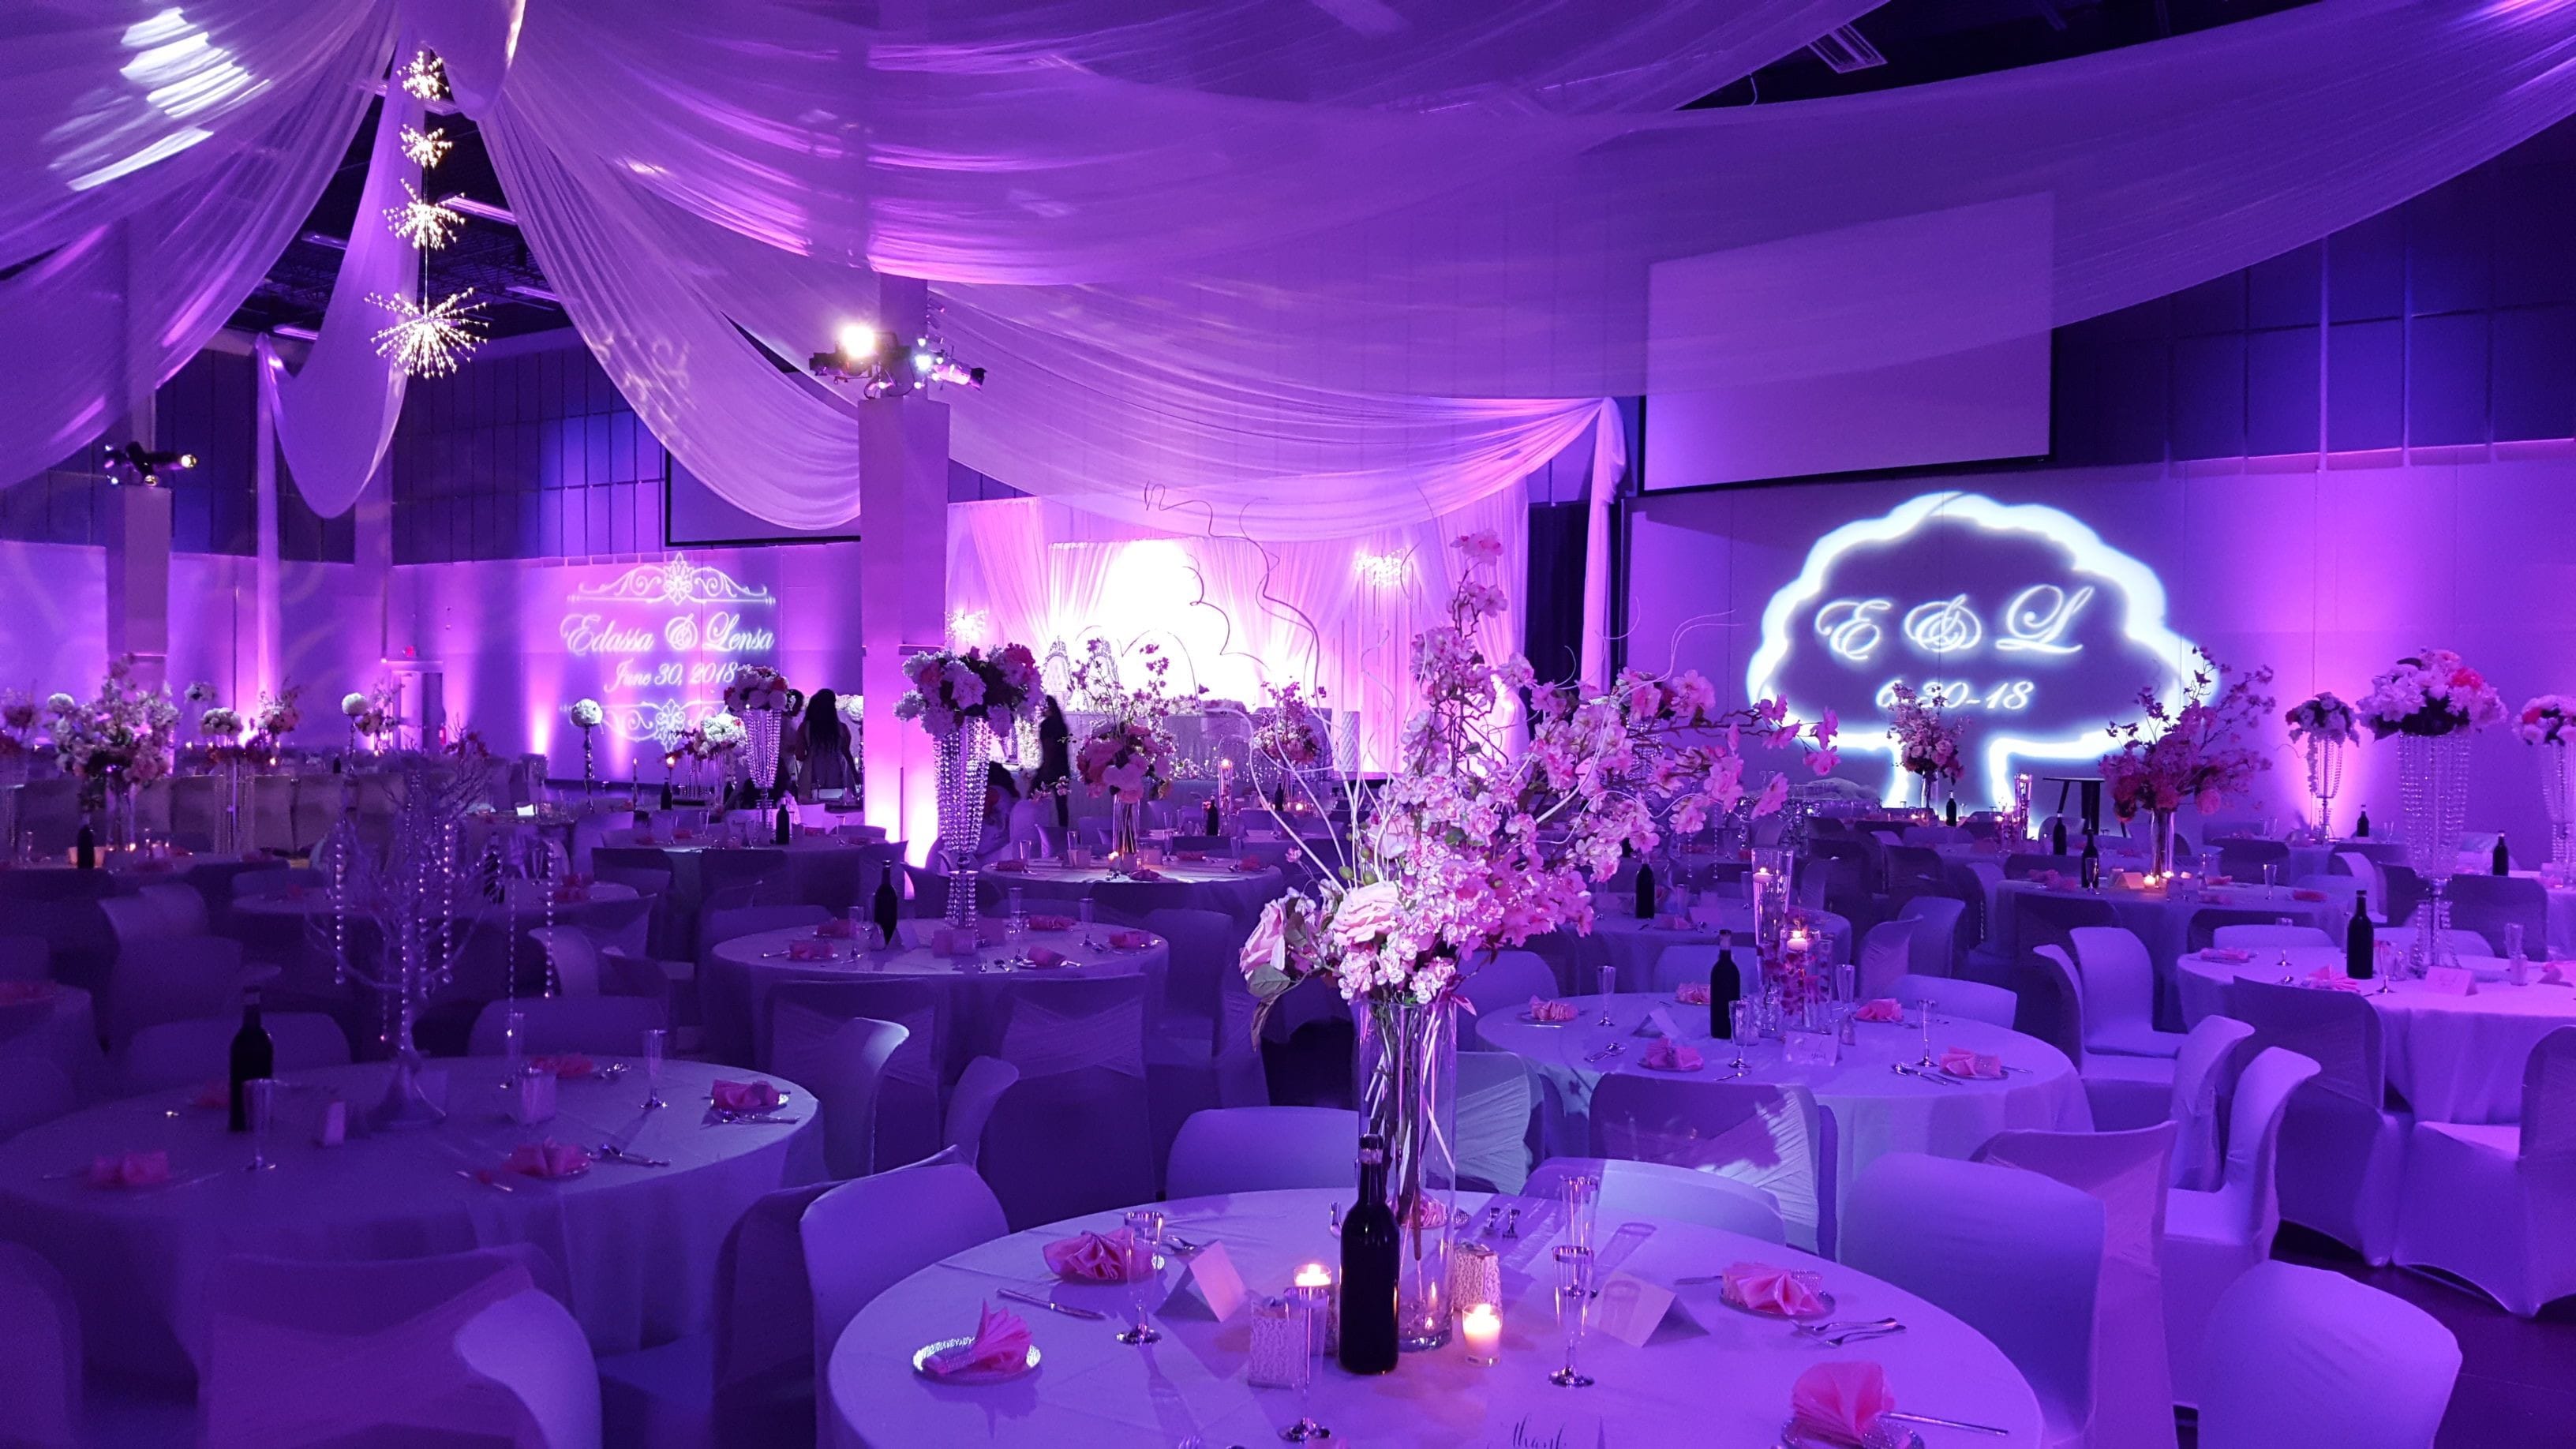 Passion Event Center, Fridley.
Wedding lighting in Magenta pink. Pin spots on flowers, wedding monogram, gobo patterns on walls.